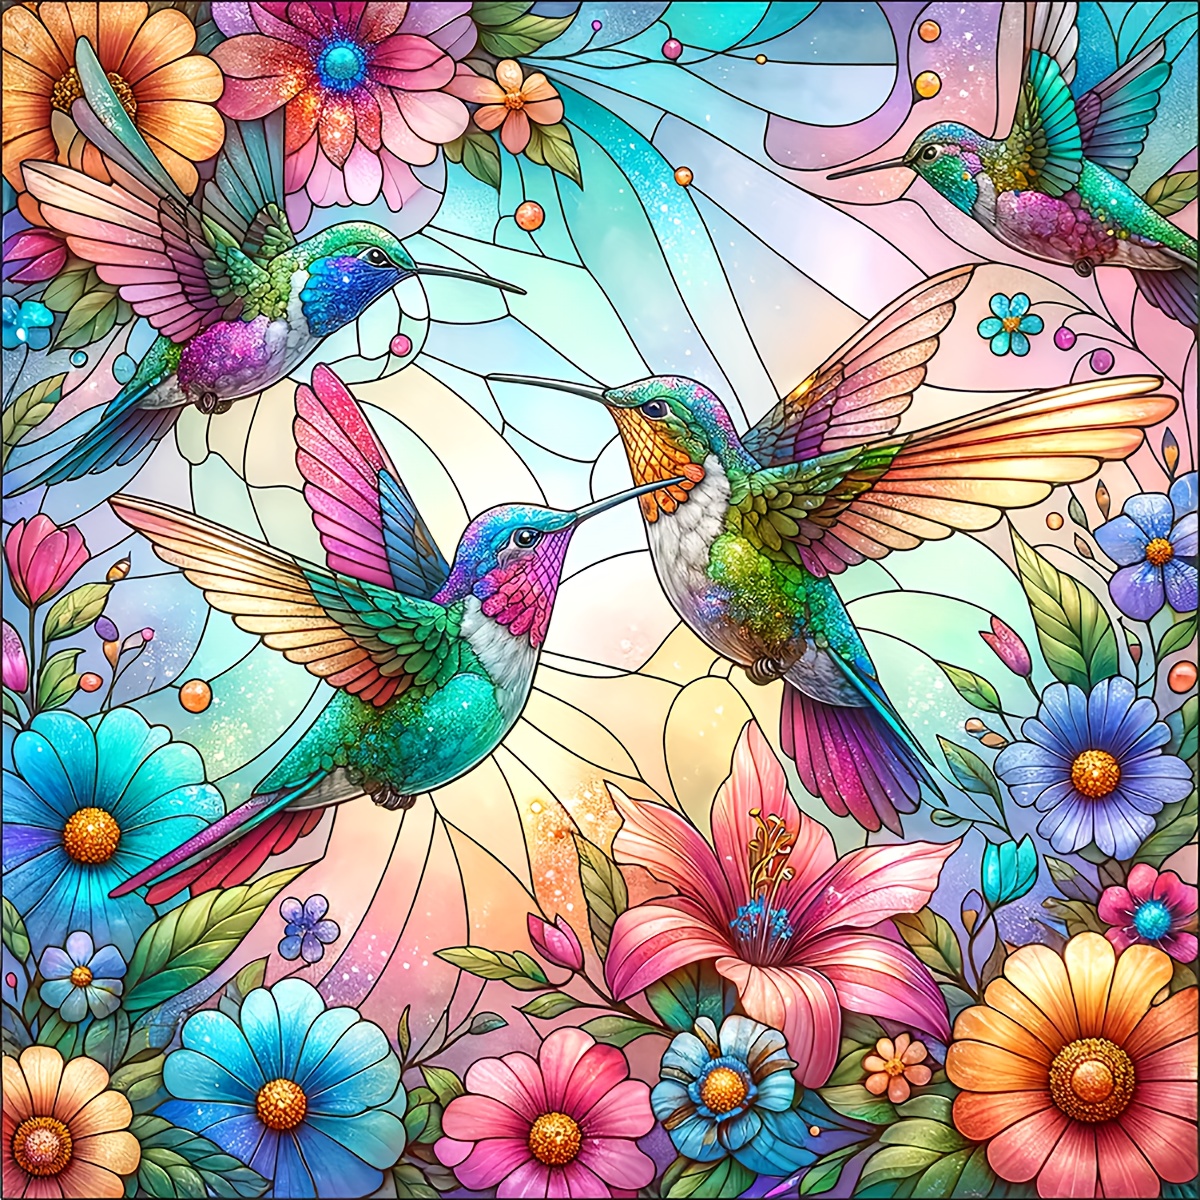 

Diy 5d Diamond Painting Kit - Colorful Hummingbird & Flowers, Round Full Drill, Frameless 9.8x9.8" - Perfect For Beginners, Unique Handmade Gift Idea